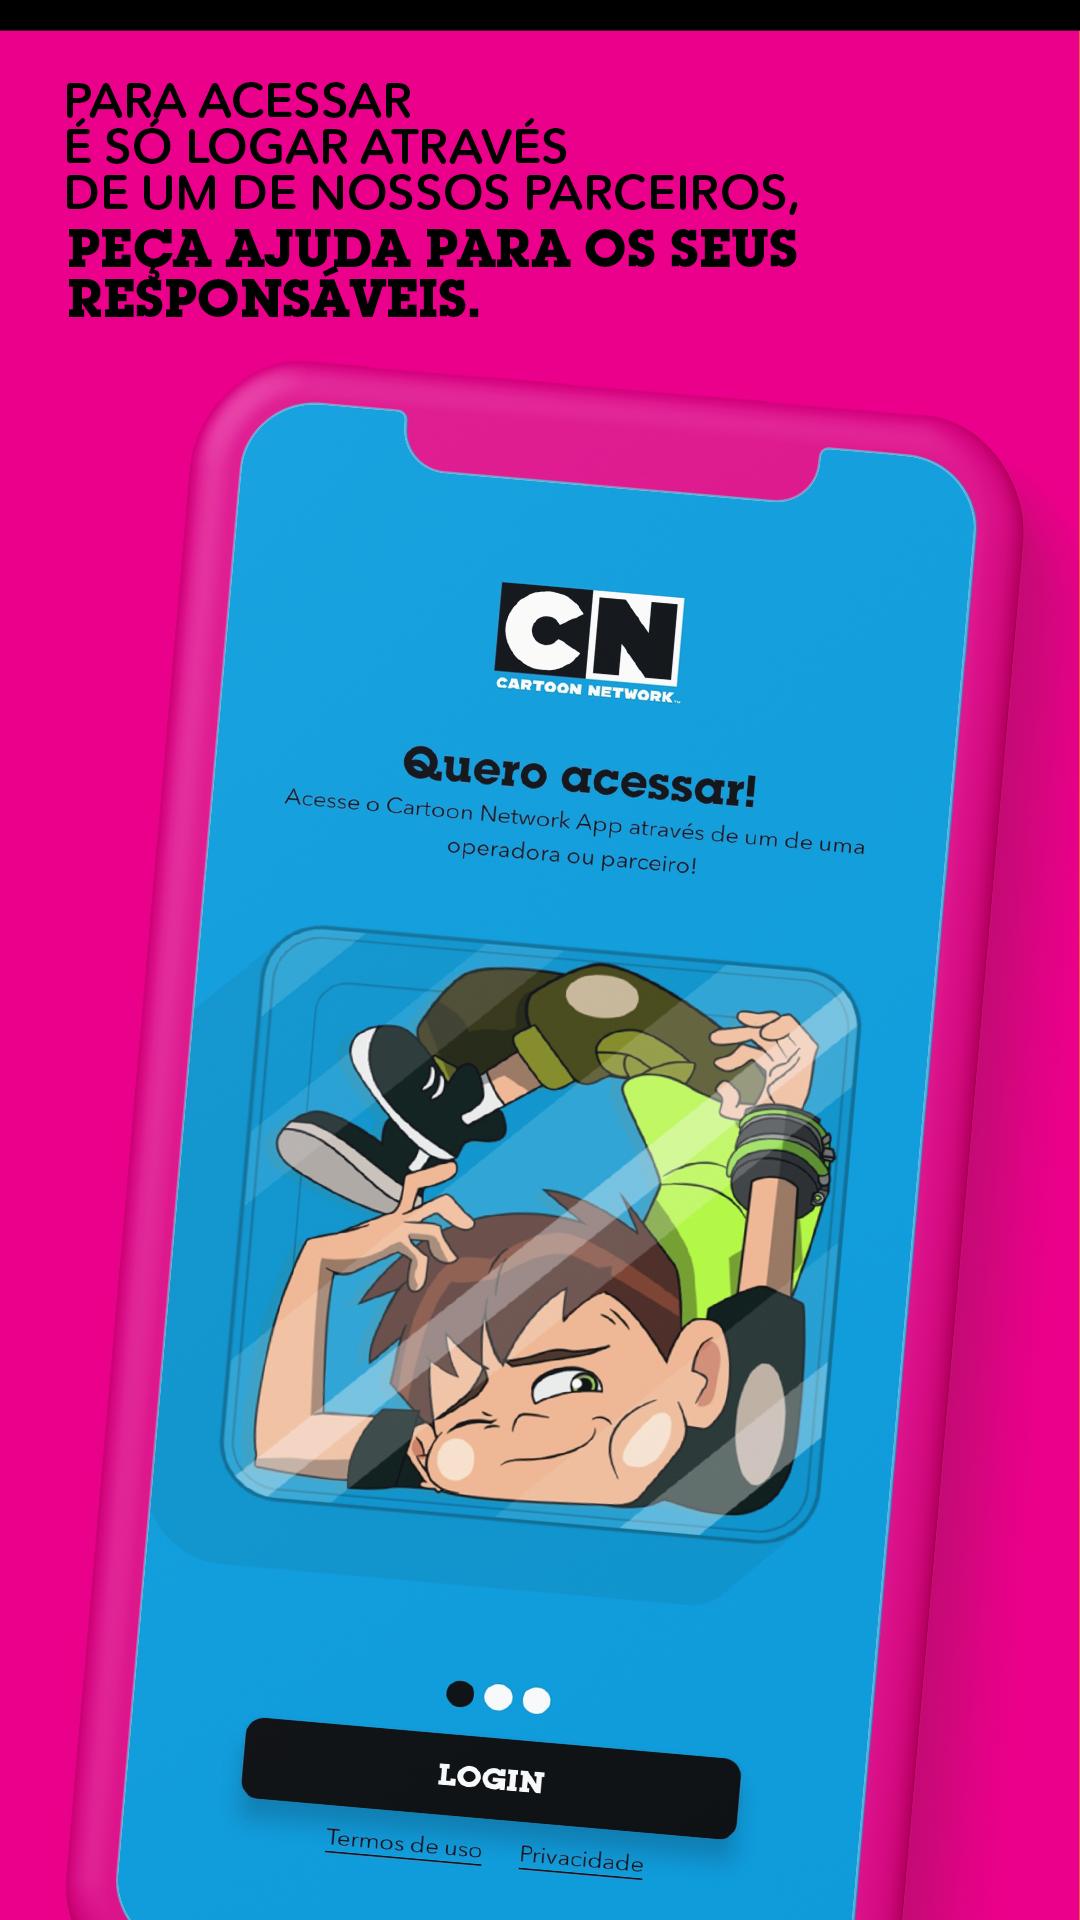 Cartoon Network for Android - APK Download